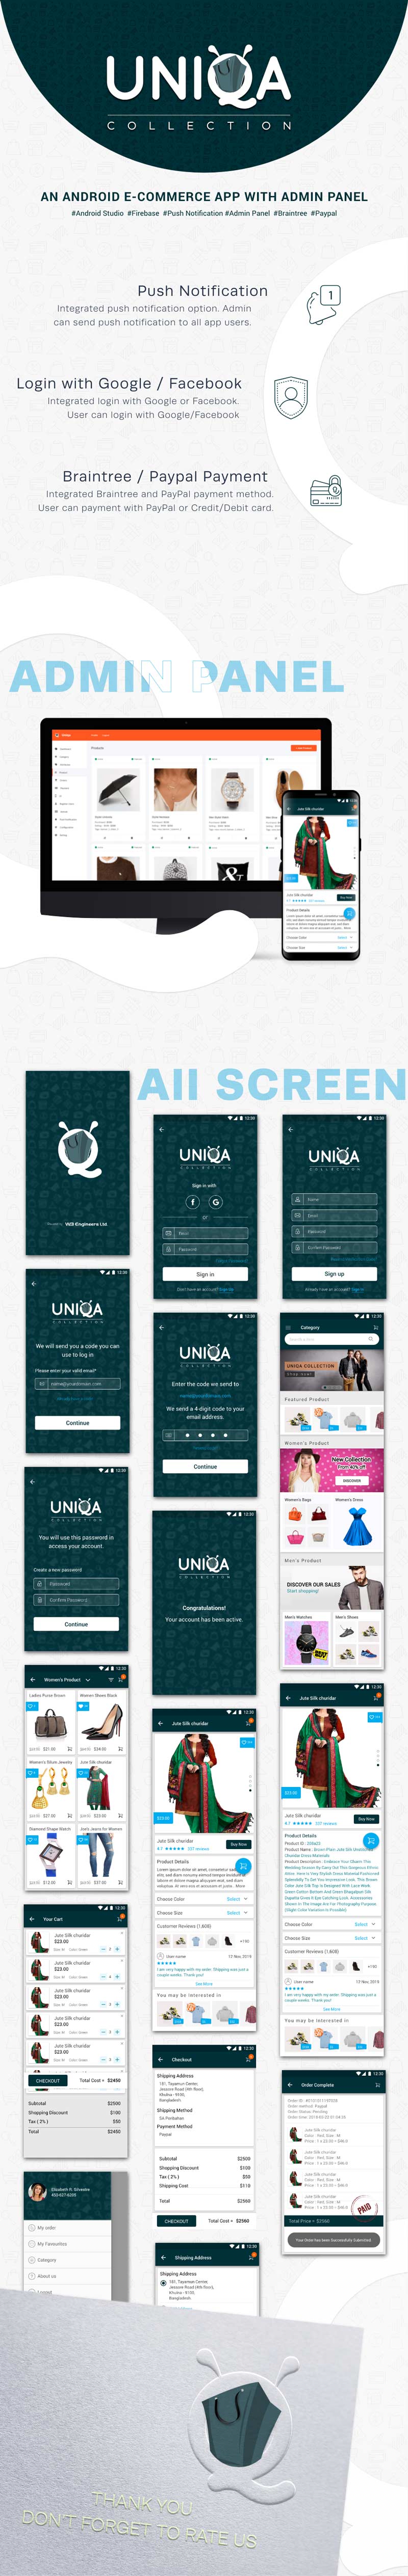 Uniqa - An android eCommerce app with admin panel - 6